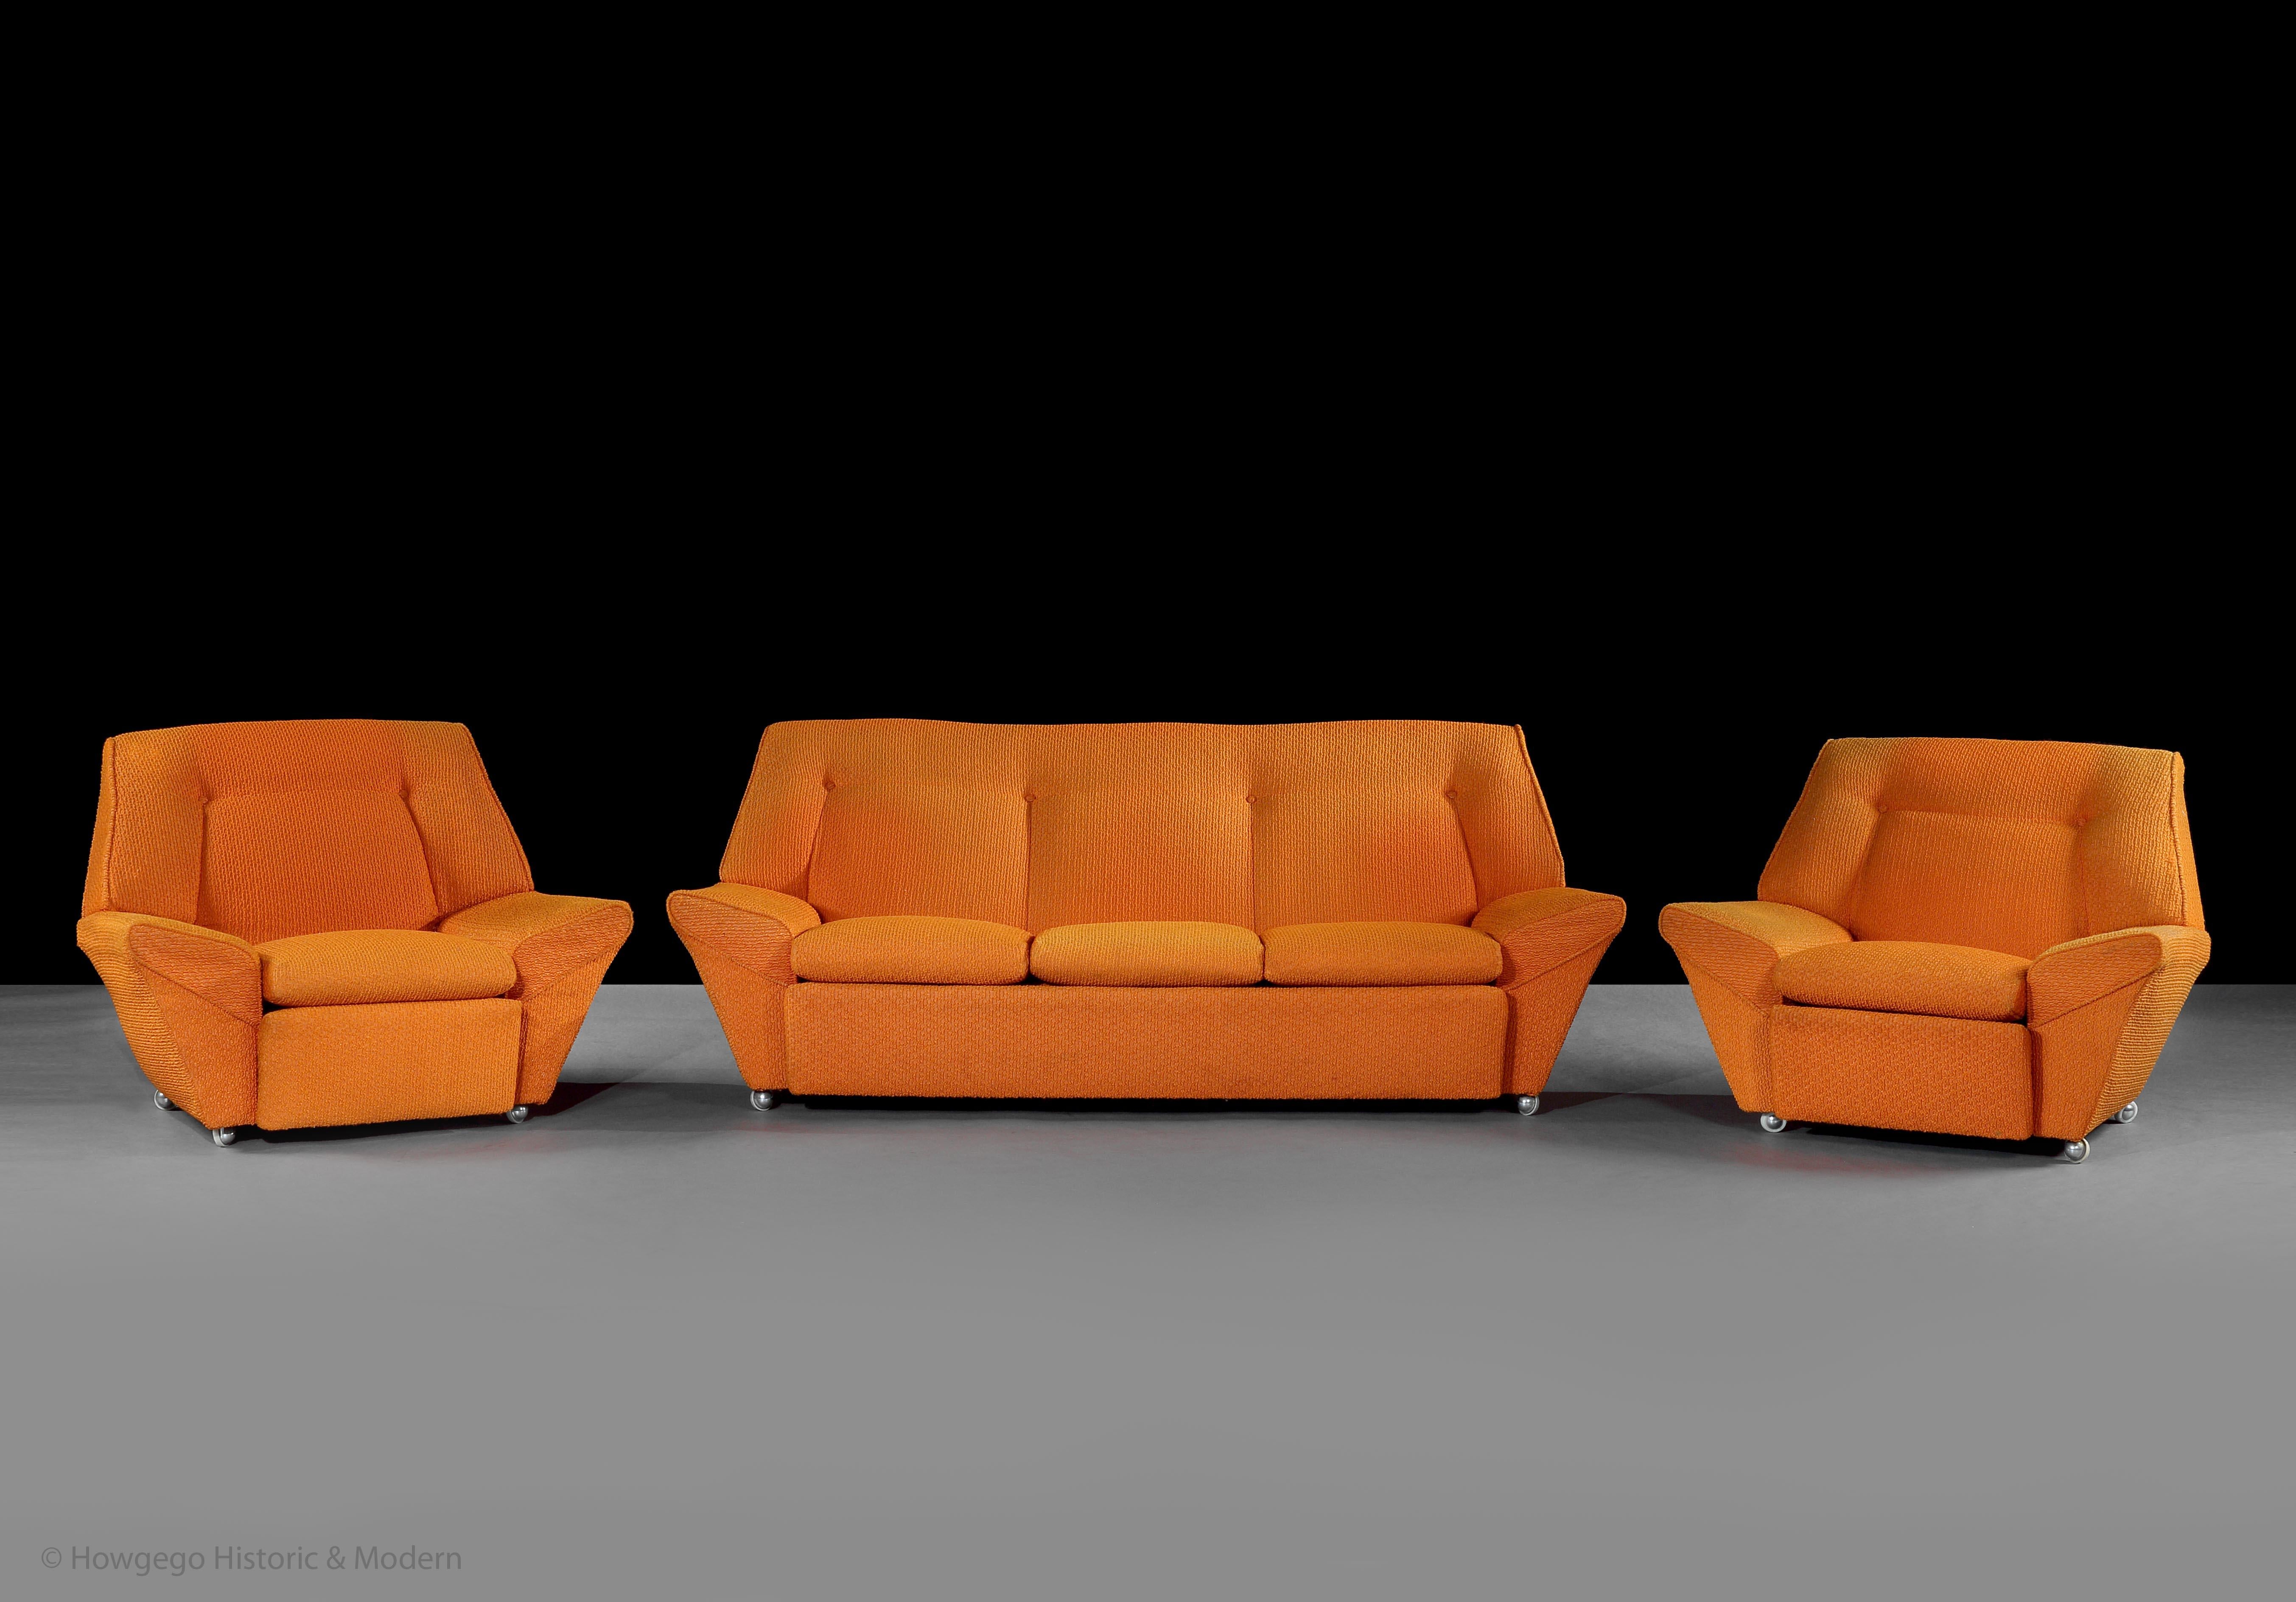 Rare, vintage 1970's, 3-piece lounge suite comprising a 3 seater, settee or sofa and a pair of armchairs all with original, orange boucle upholstery in fabulous condition and original castors


Just purchased more information to follow or available